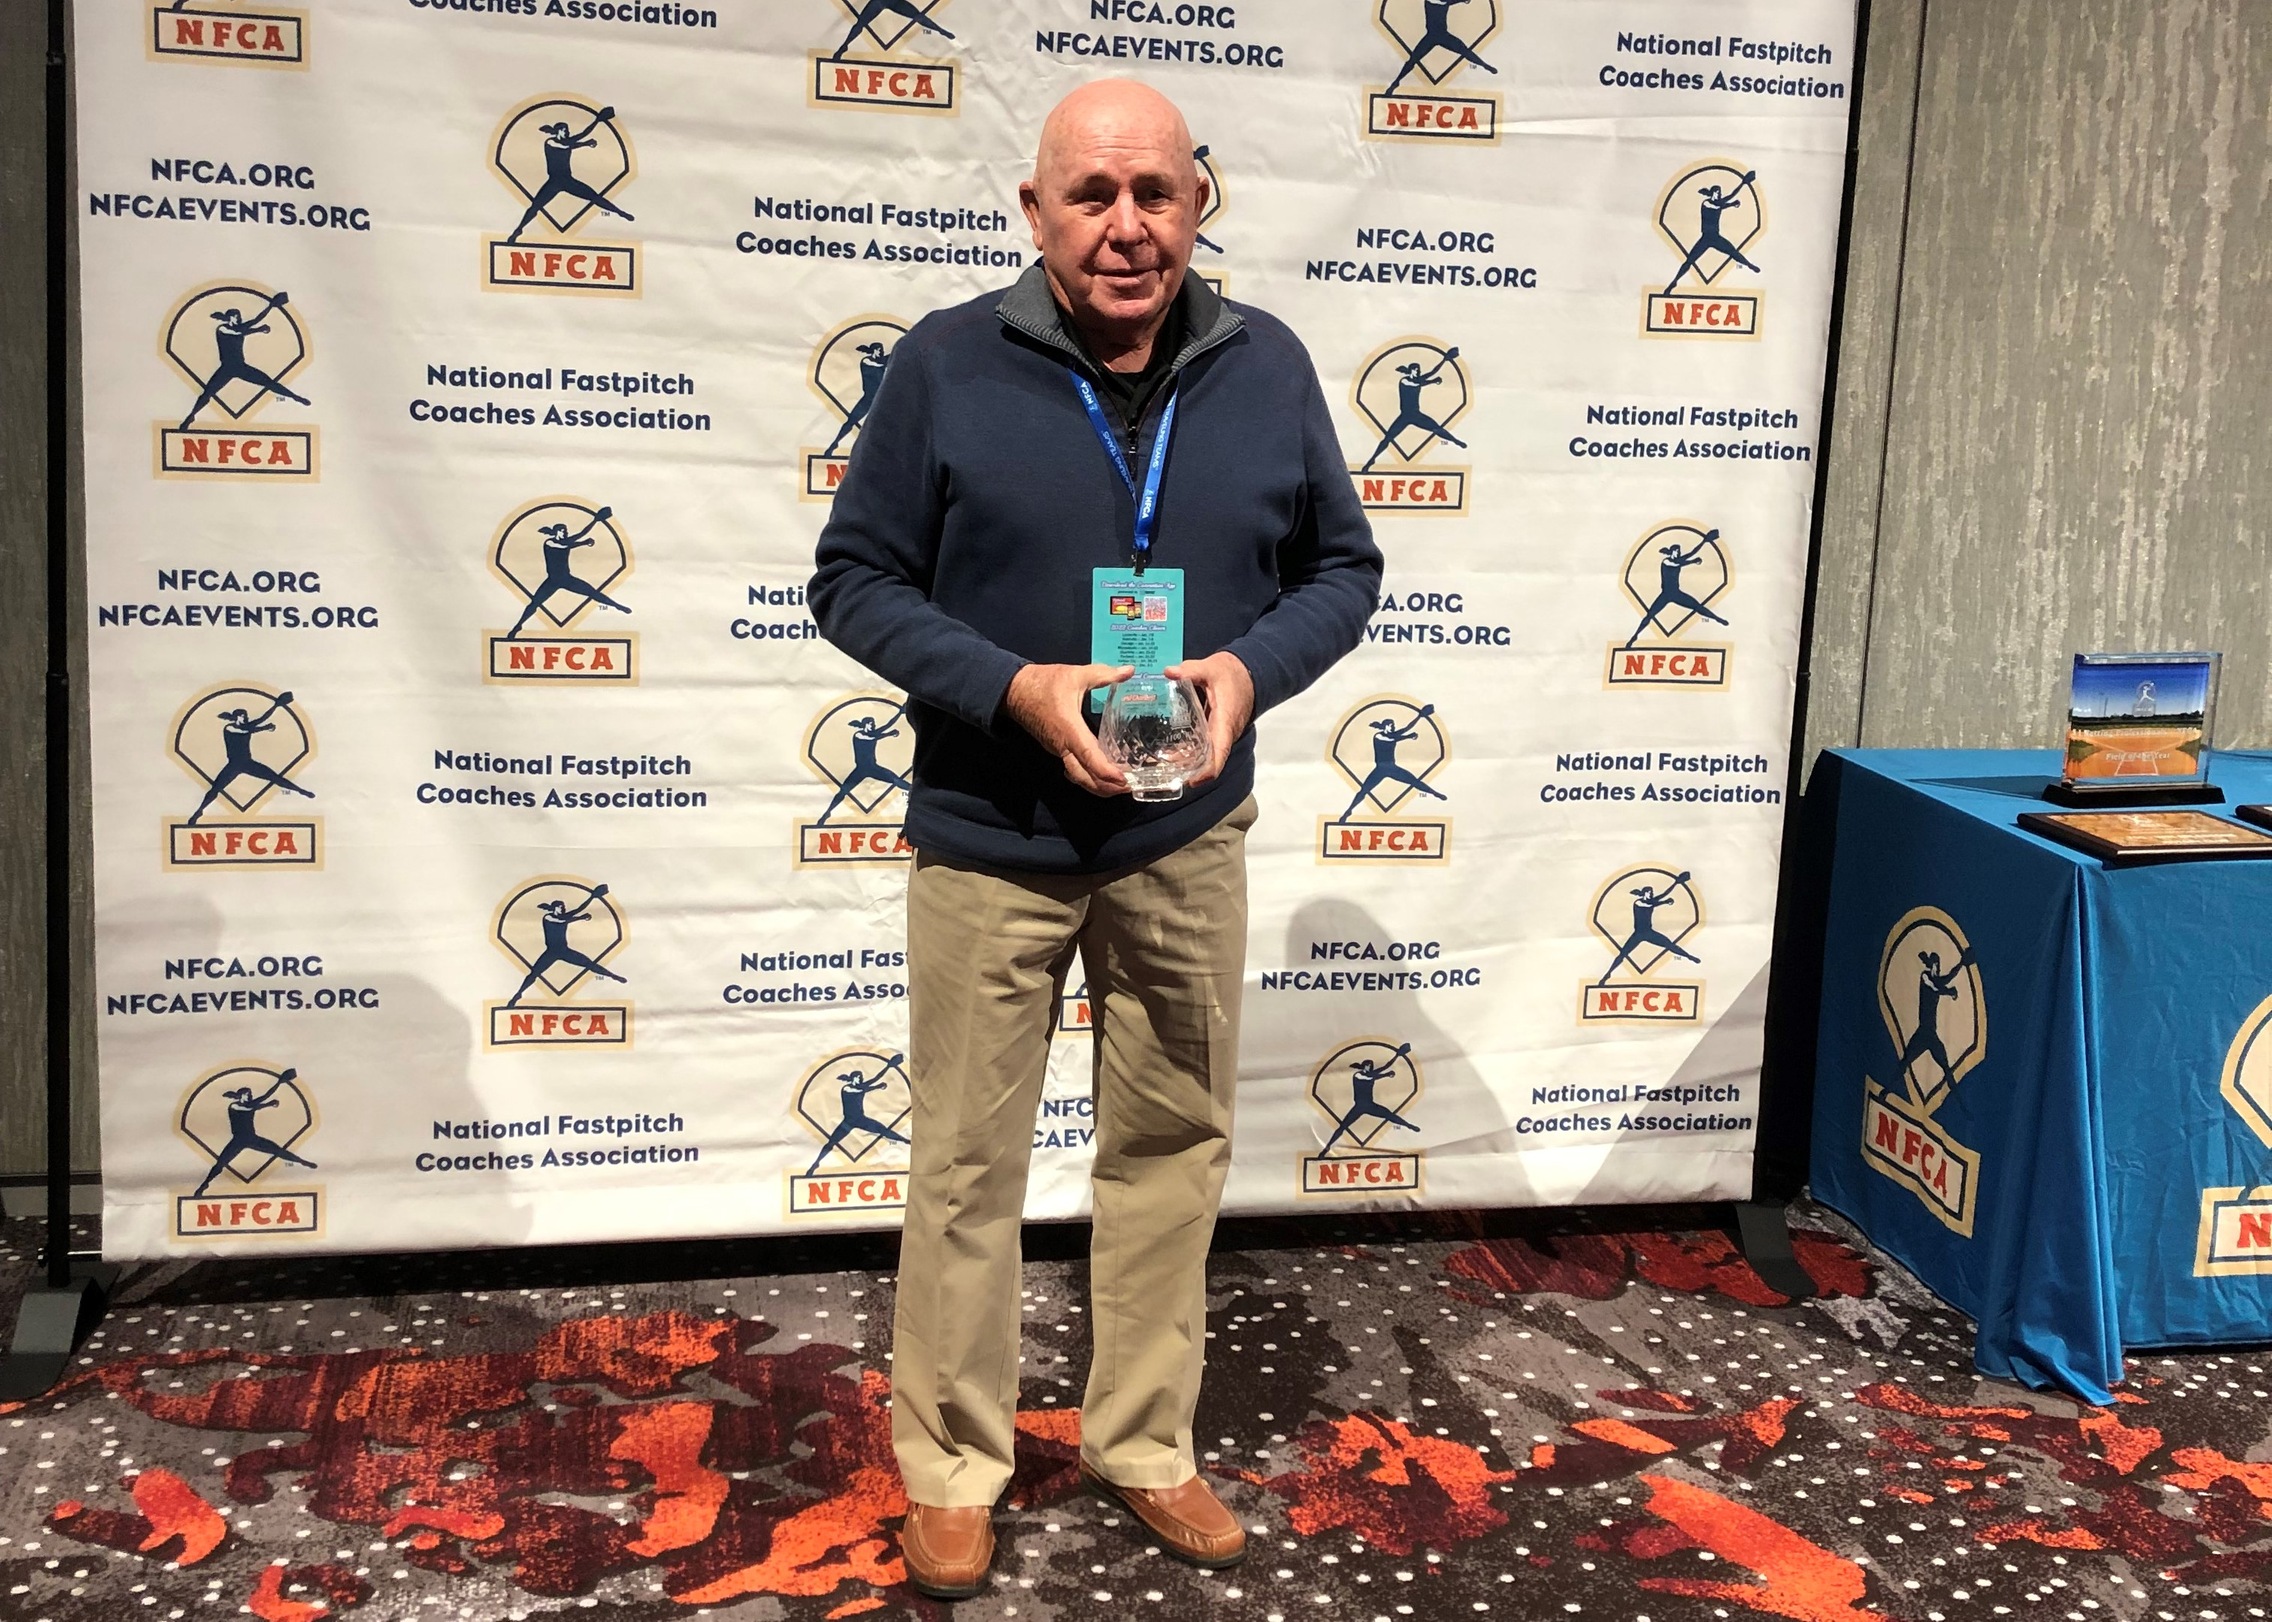 Coach Kiernan is honored by the NFCA for his 1,100 career wins